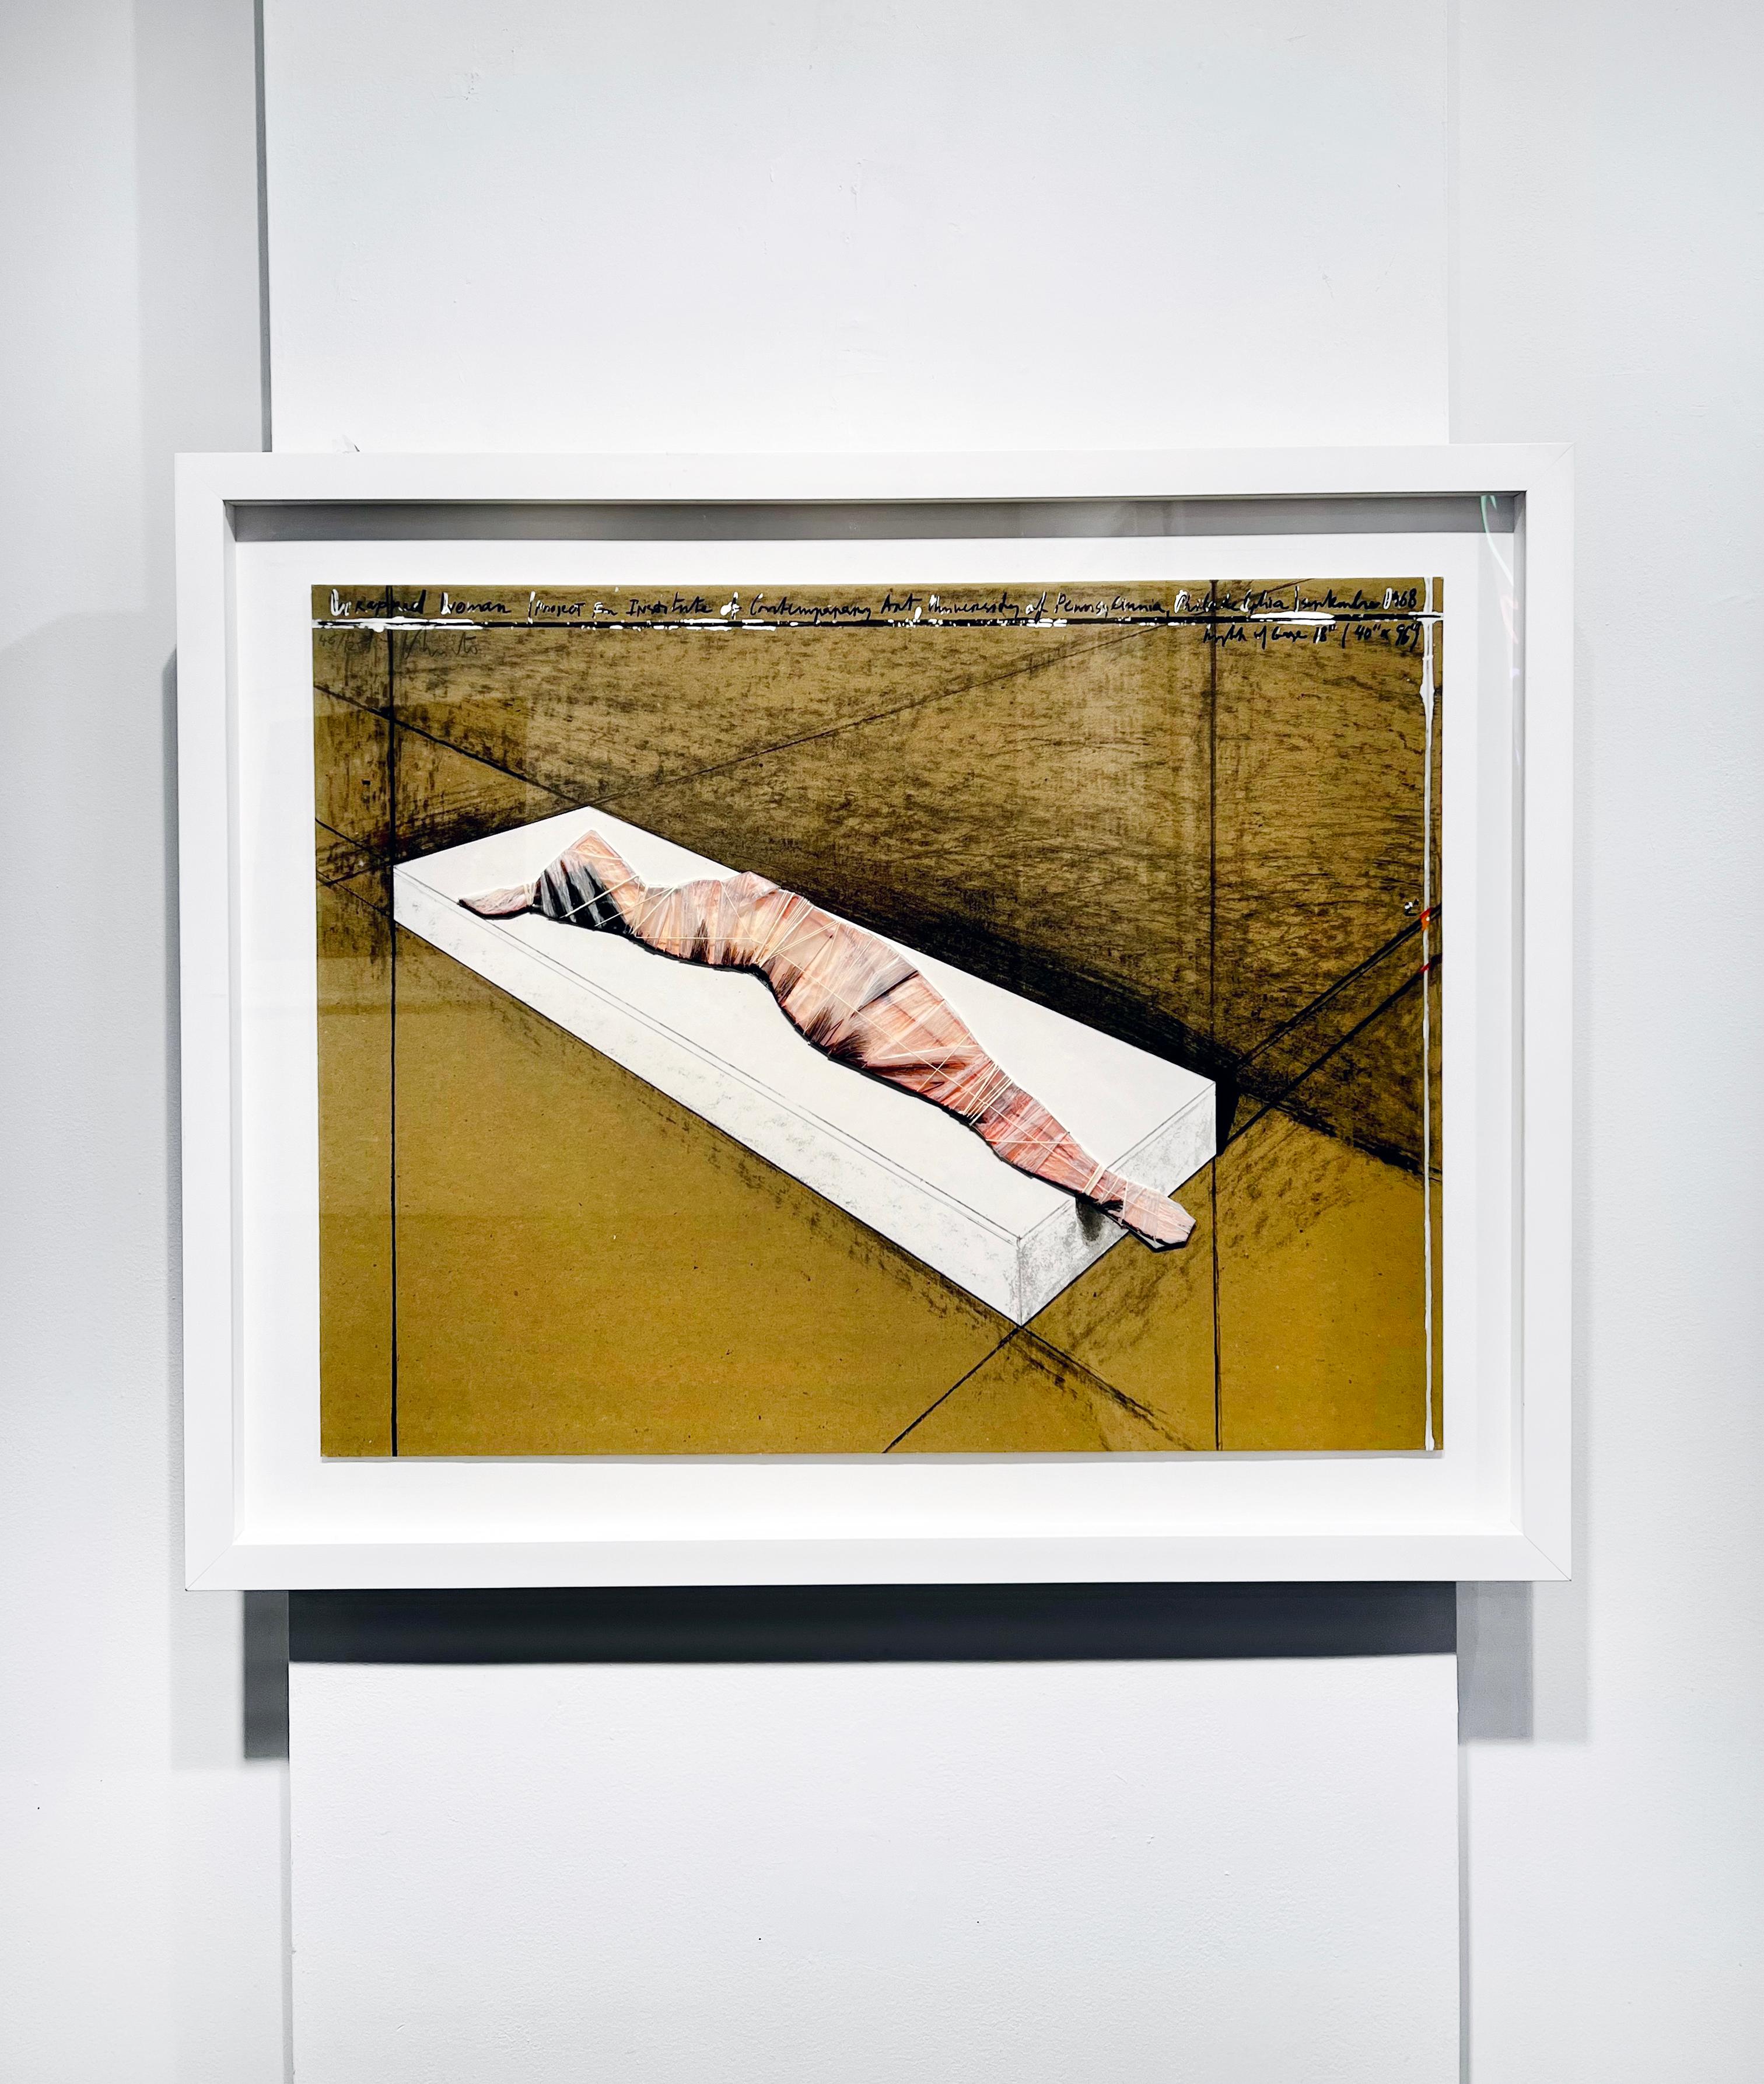 Wrapped Woman - Print by Christo and Jeanne-Claude